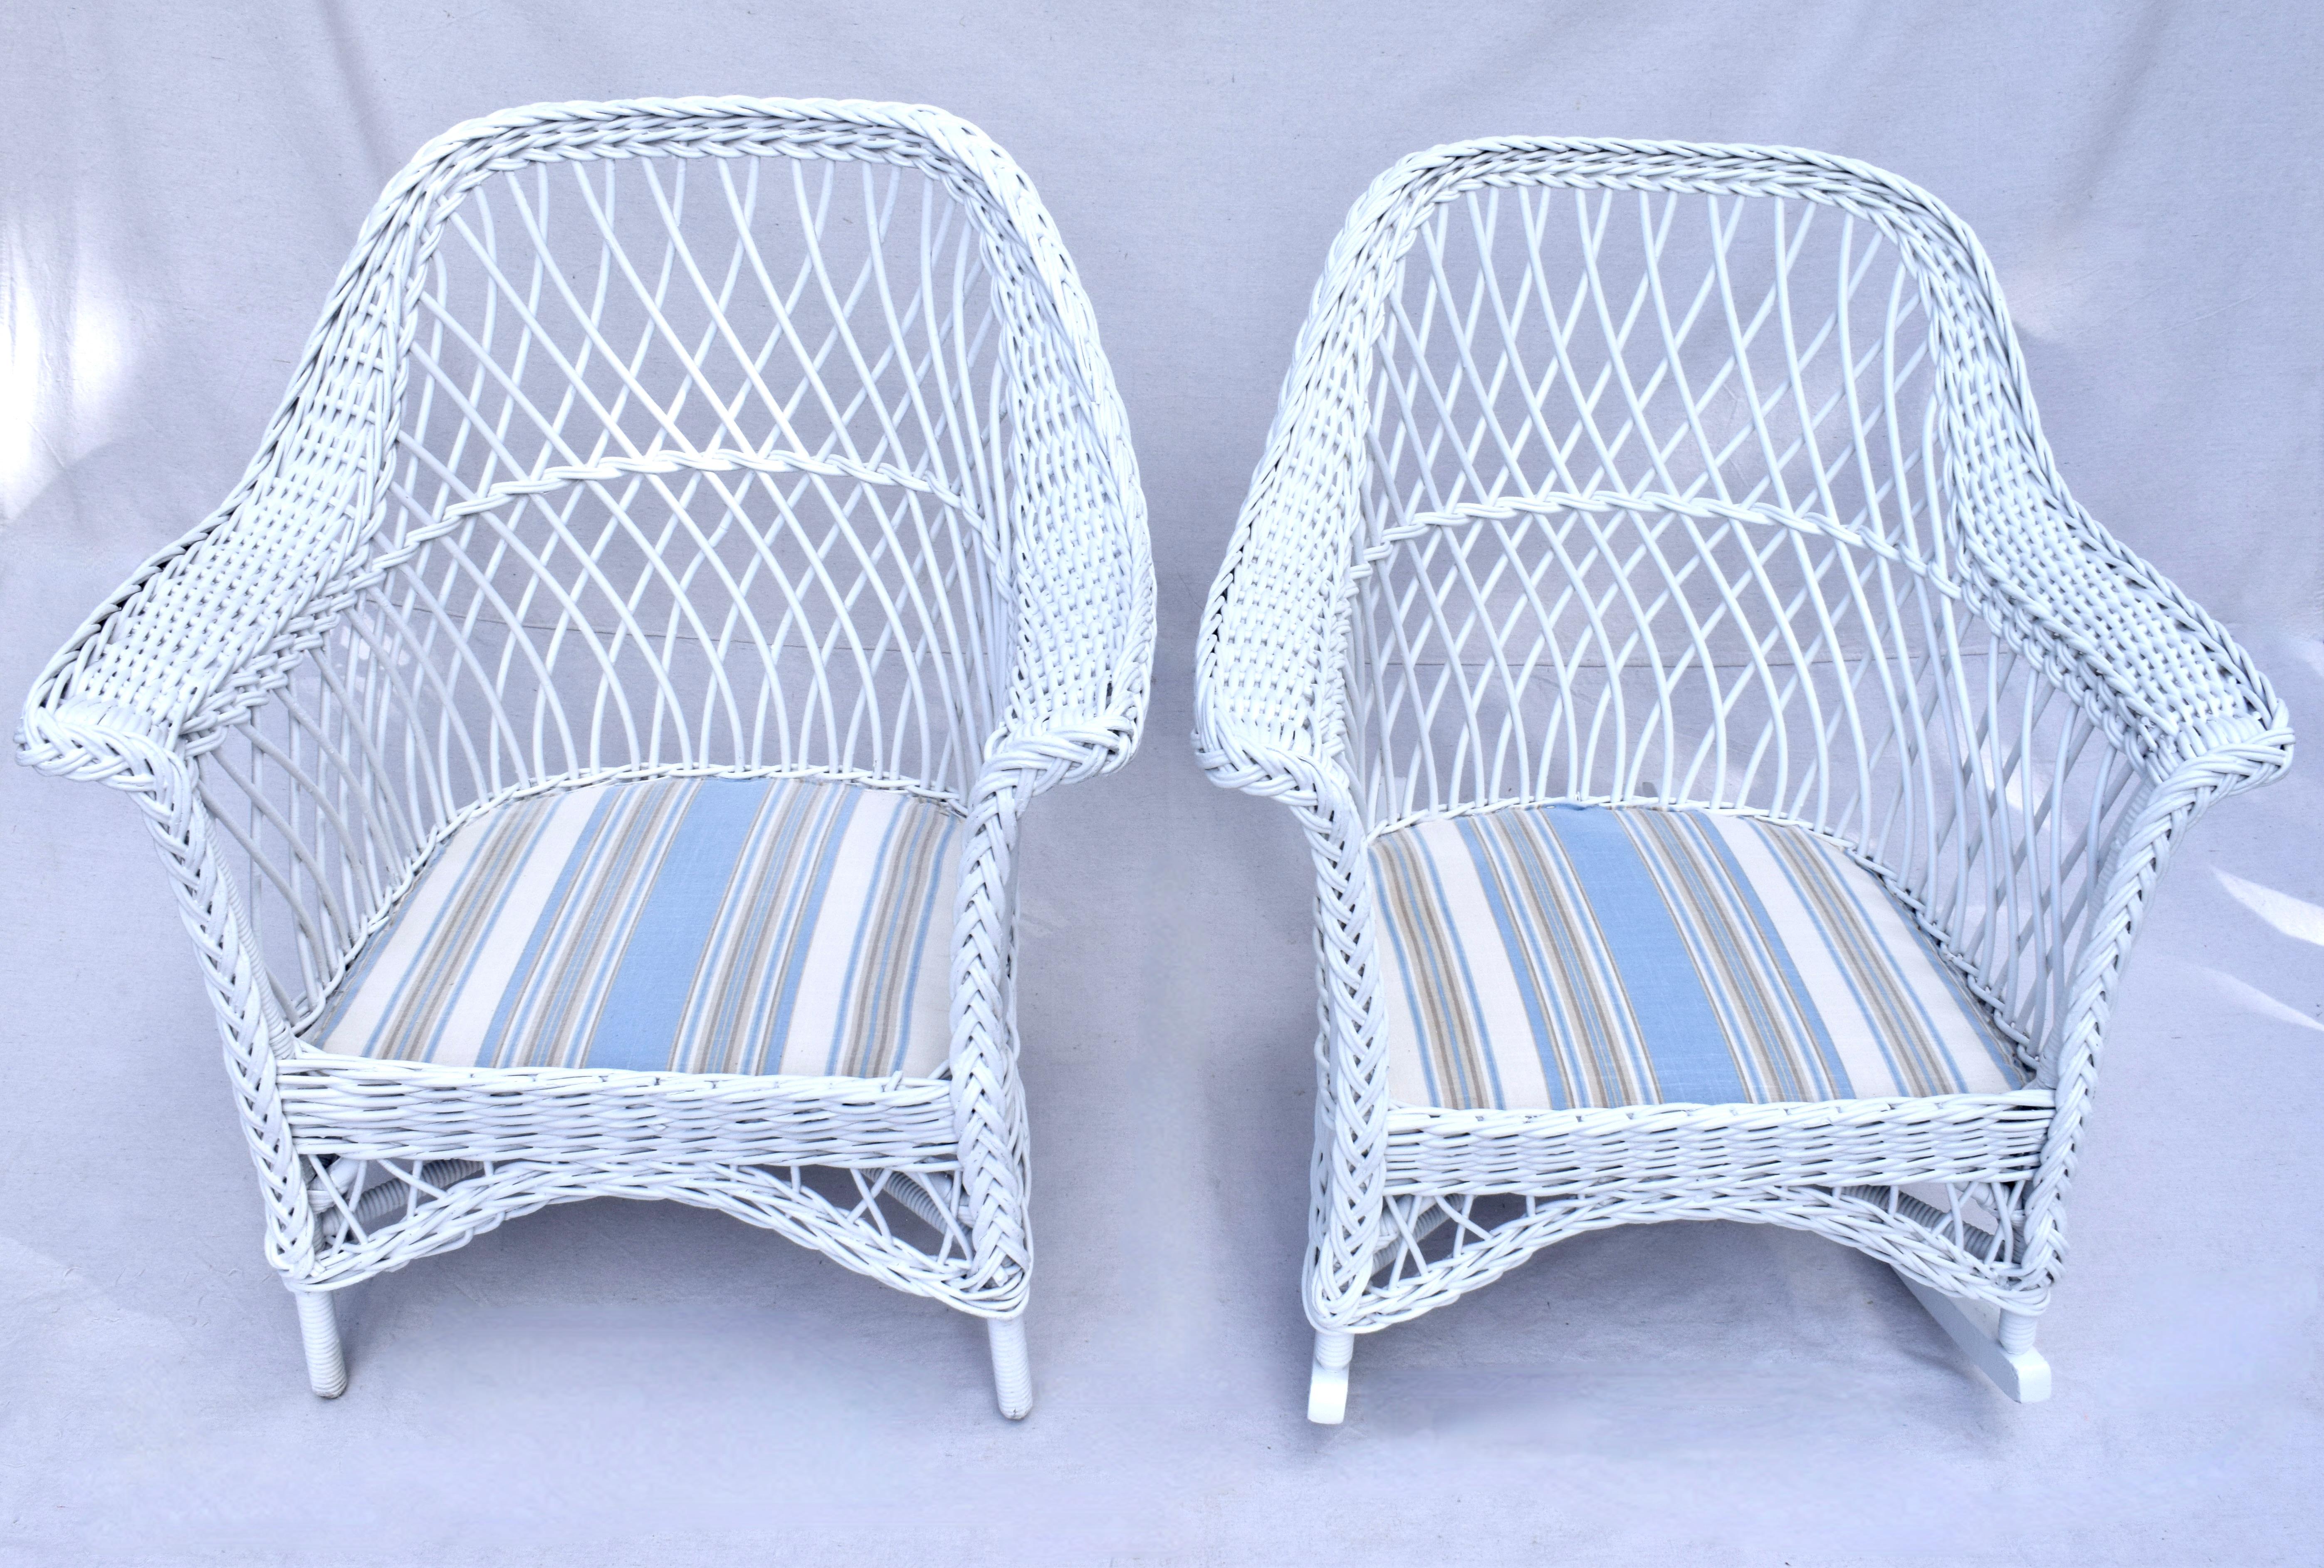 20th Century Antique Bar Harbor Wicker Chair & Rocker - Set of 2 For Sale